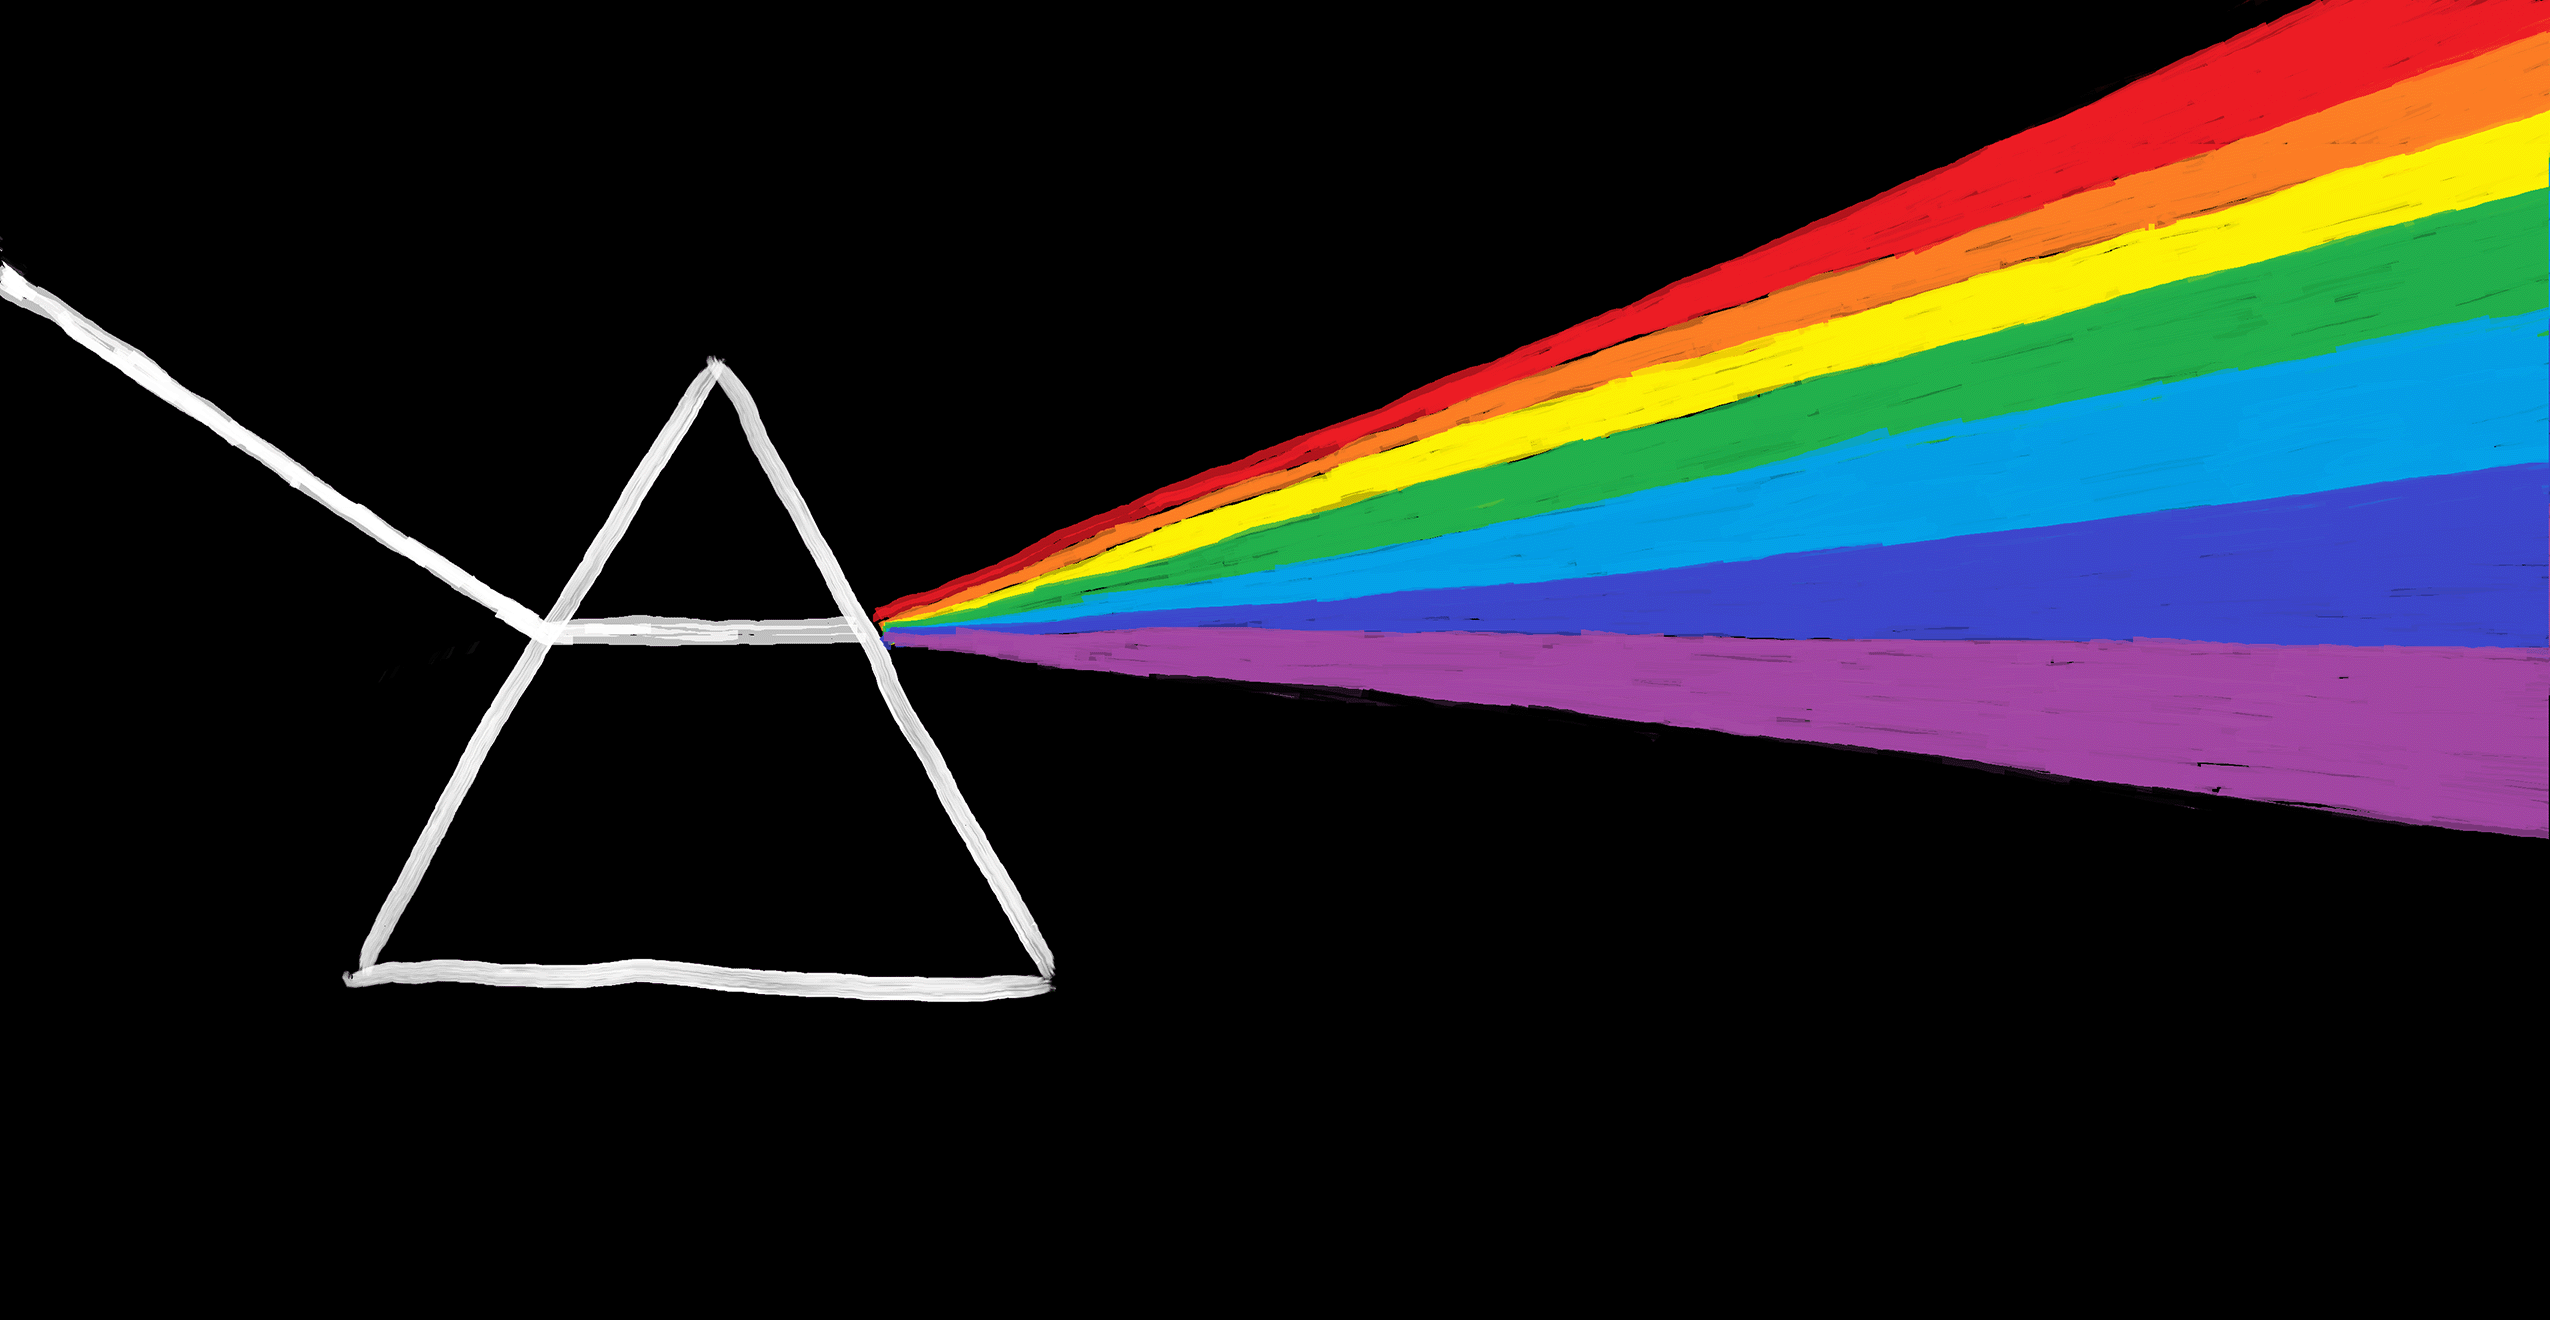 Sketch of rainbow refracting through triangle prism